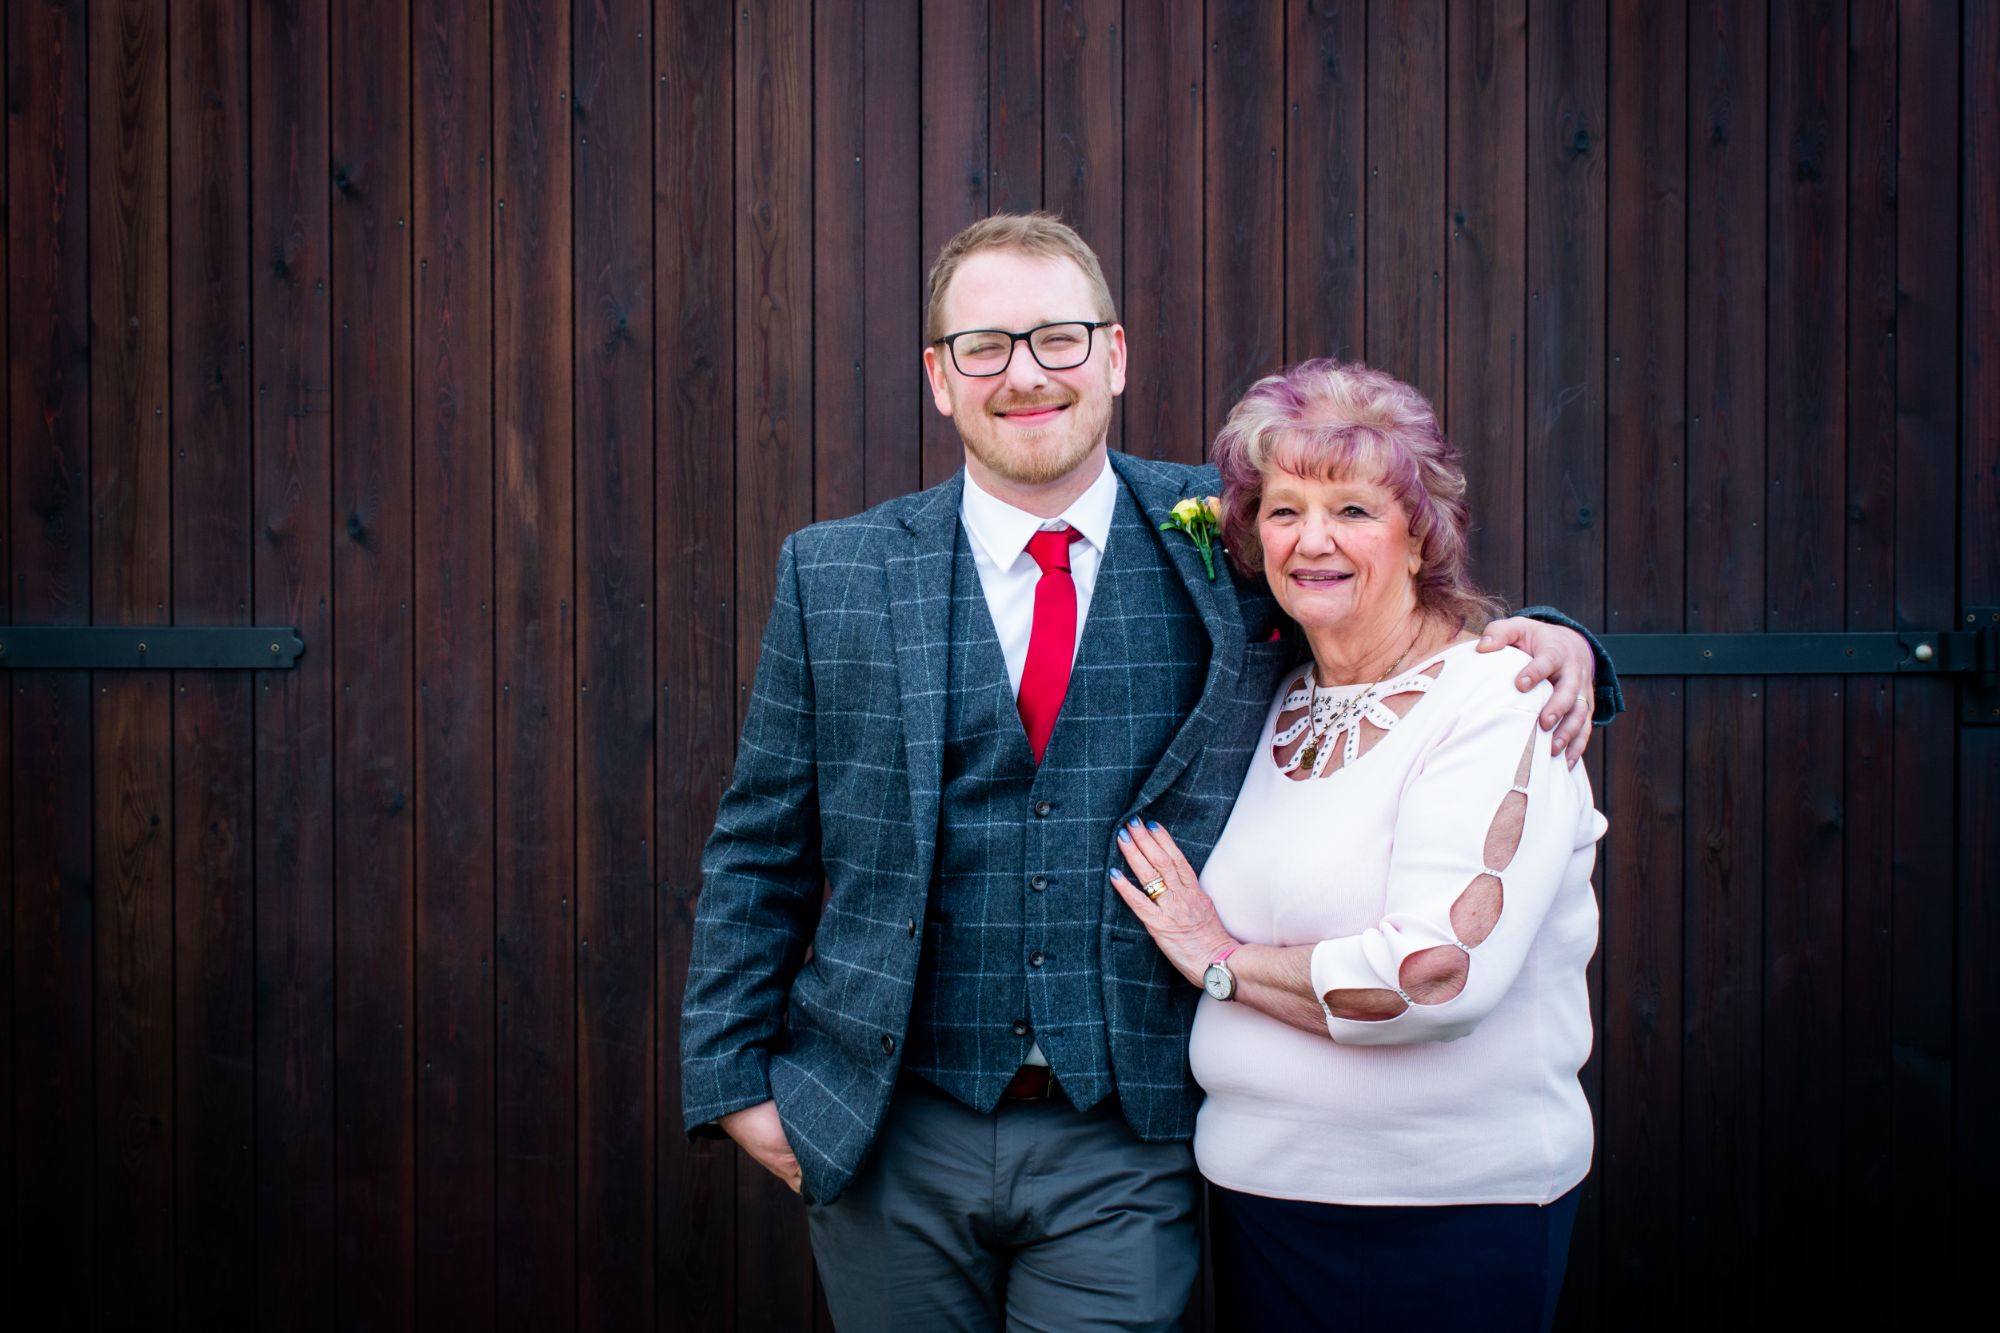 A proud Mum stands with her son, the groom, in front of old barn doors at his wedding in York